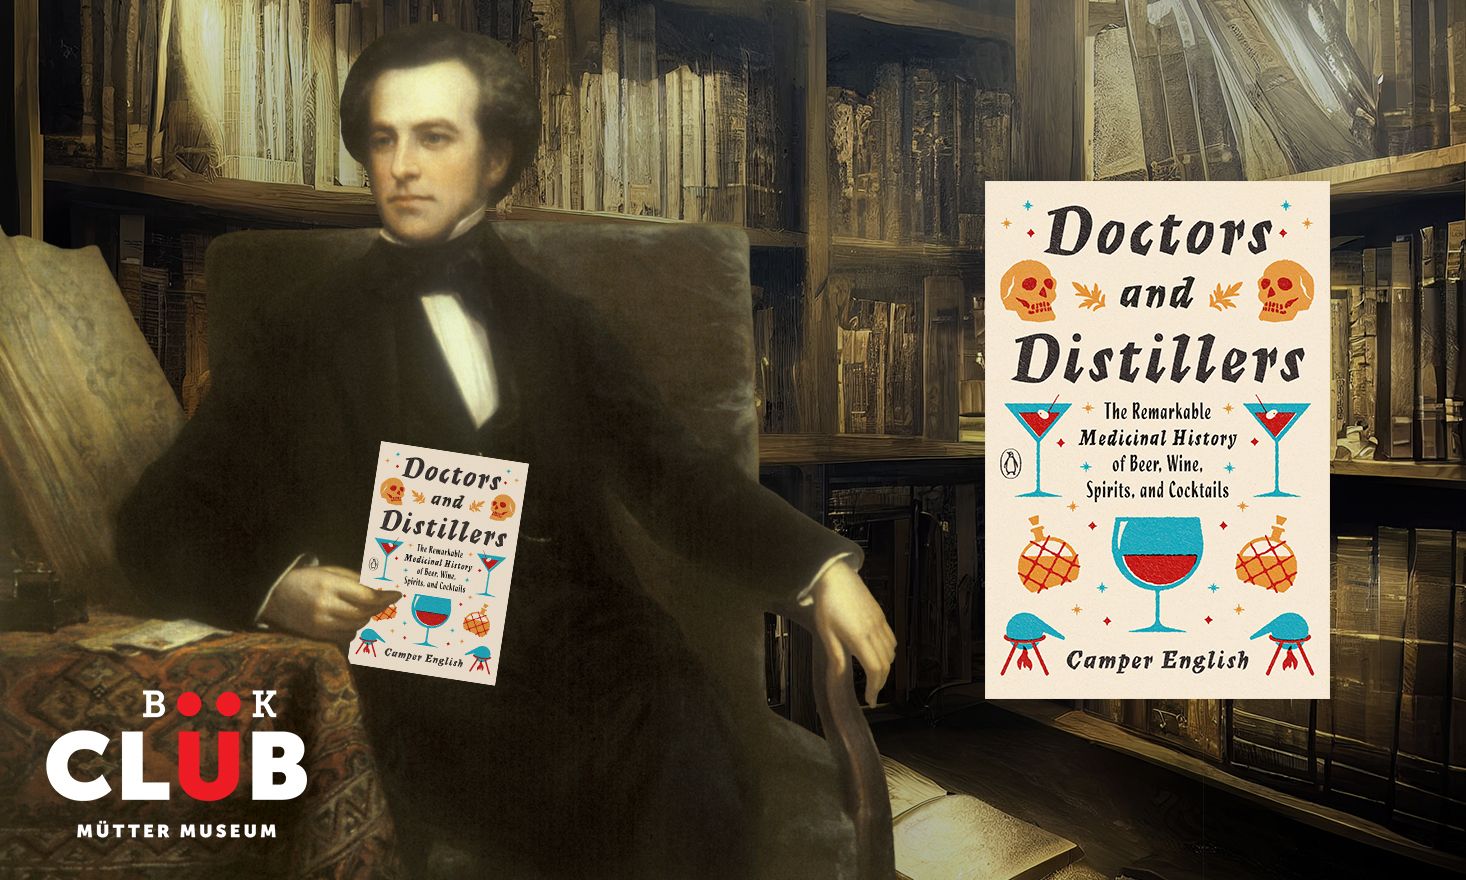 Image of 19th century man sitting in a library holding copy of "Doctors and Distillers"